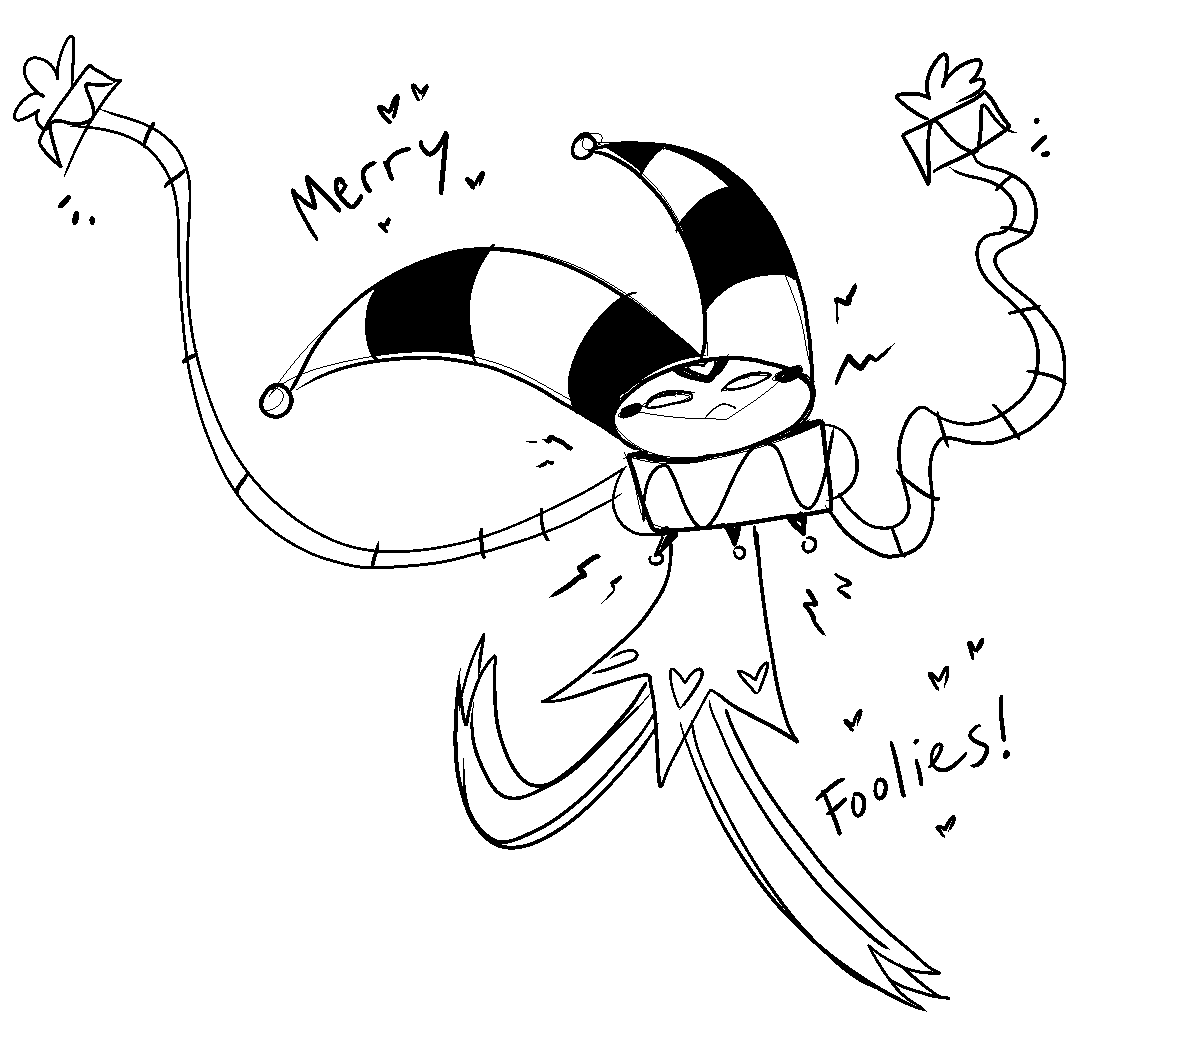 Fizzy wishes you all a Merry Foolie on this holiday doodily April firsty ? 